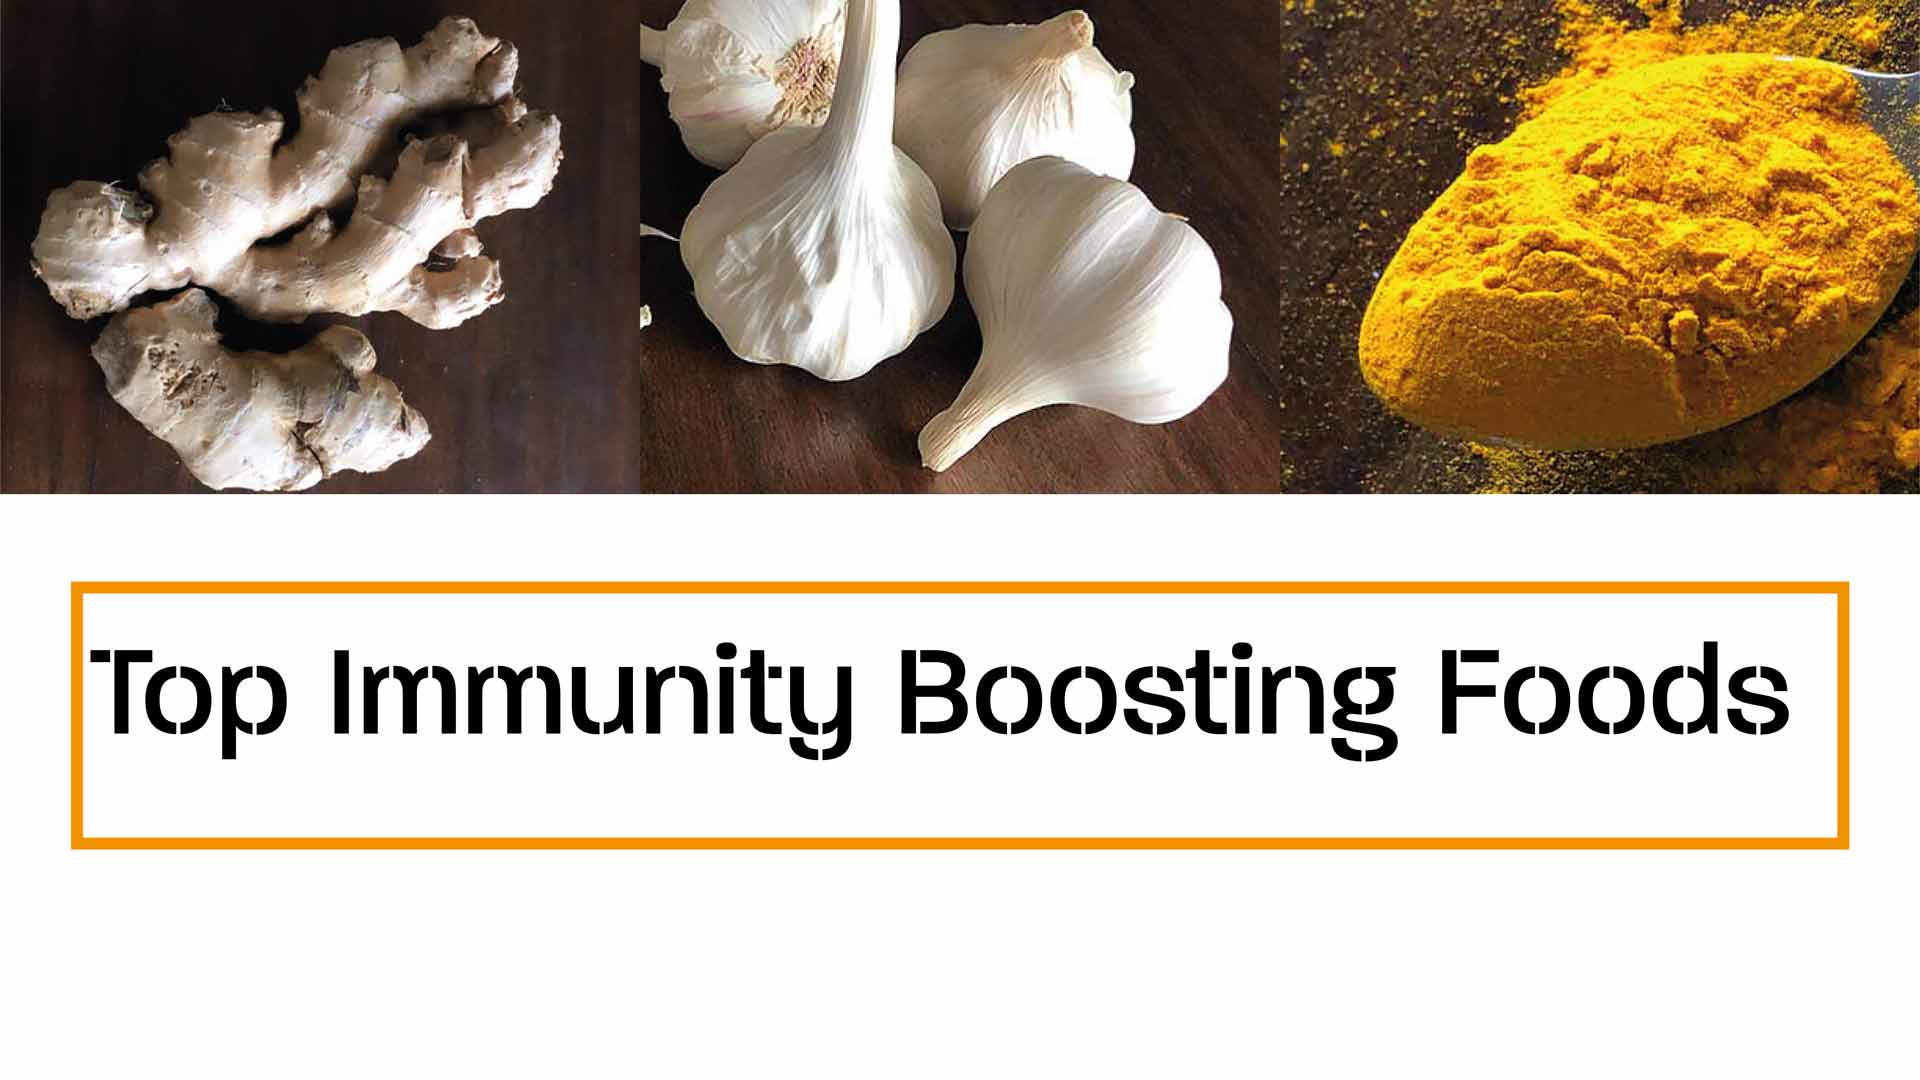 Immunity Boosting Foods & Recipes to make your Immune System Stronger